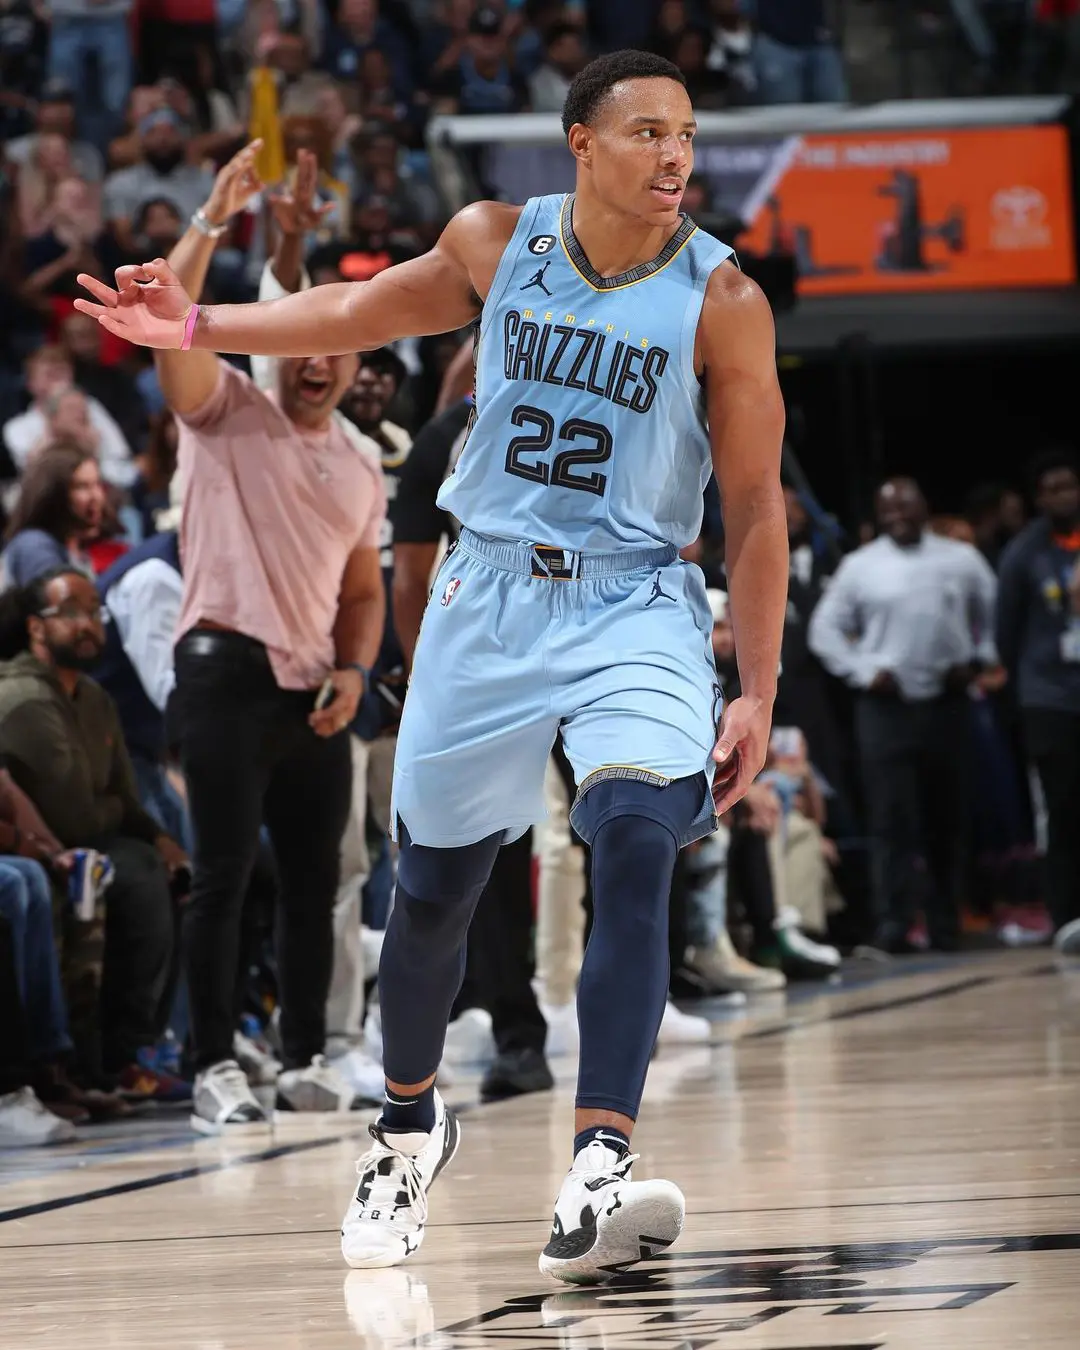 Desmond Bane plays as the shooting guard for the Grizzlies 